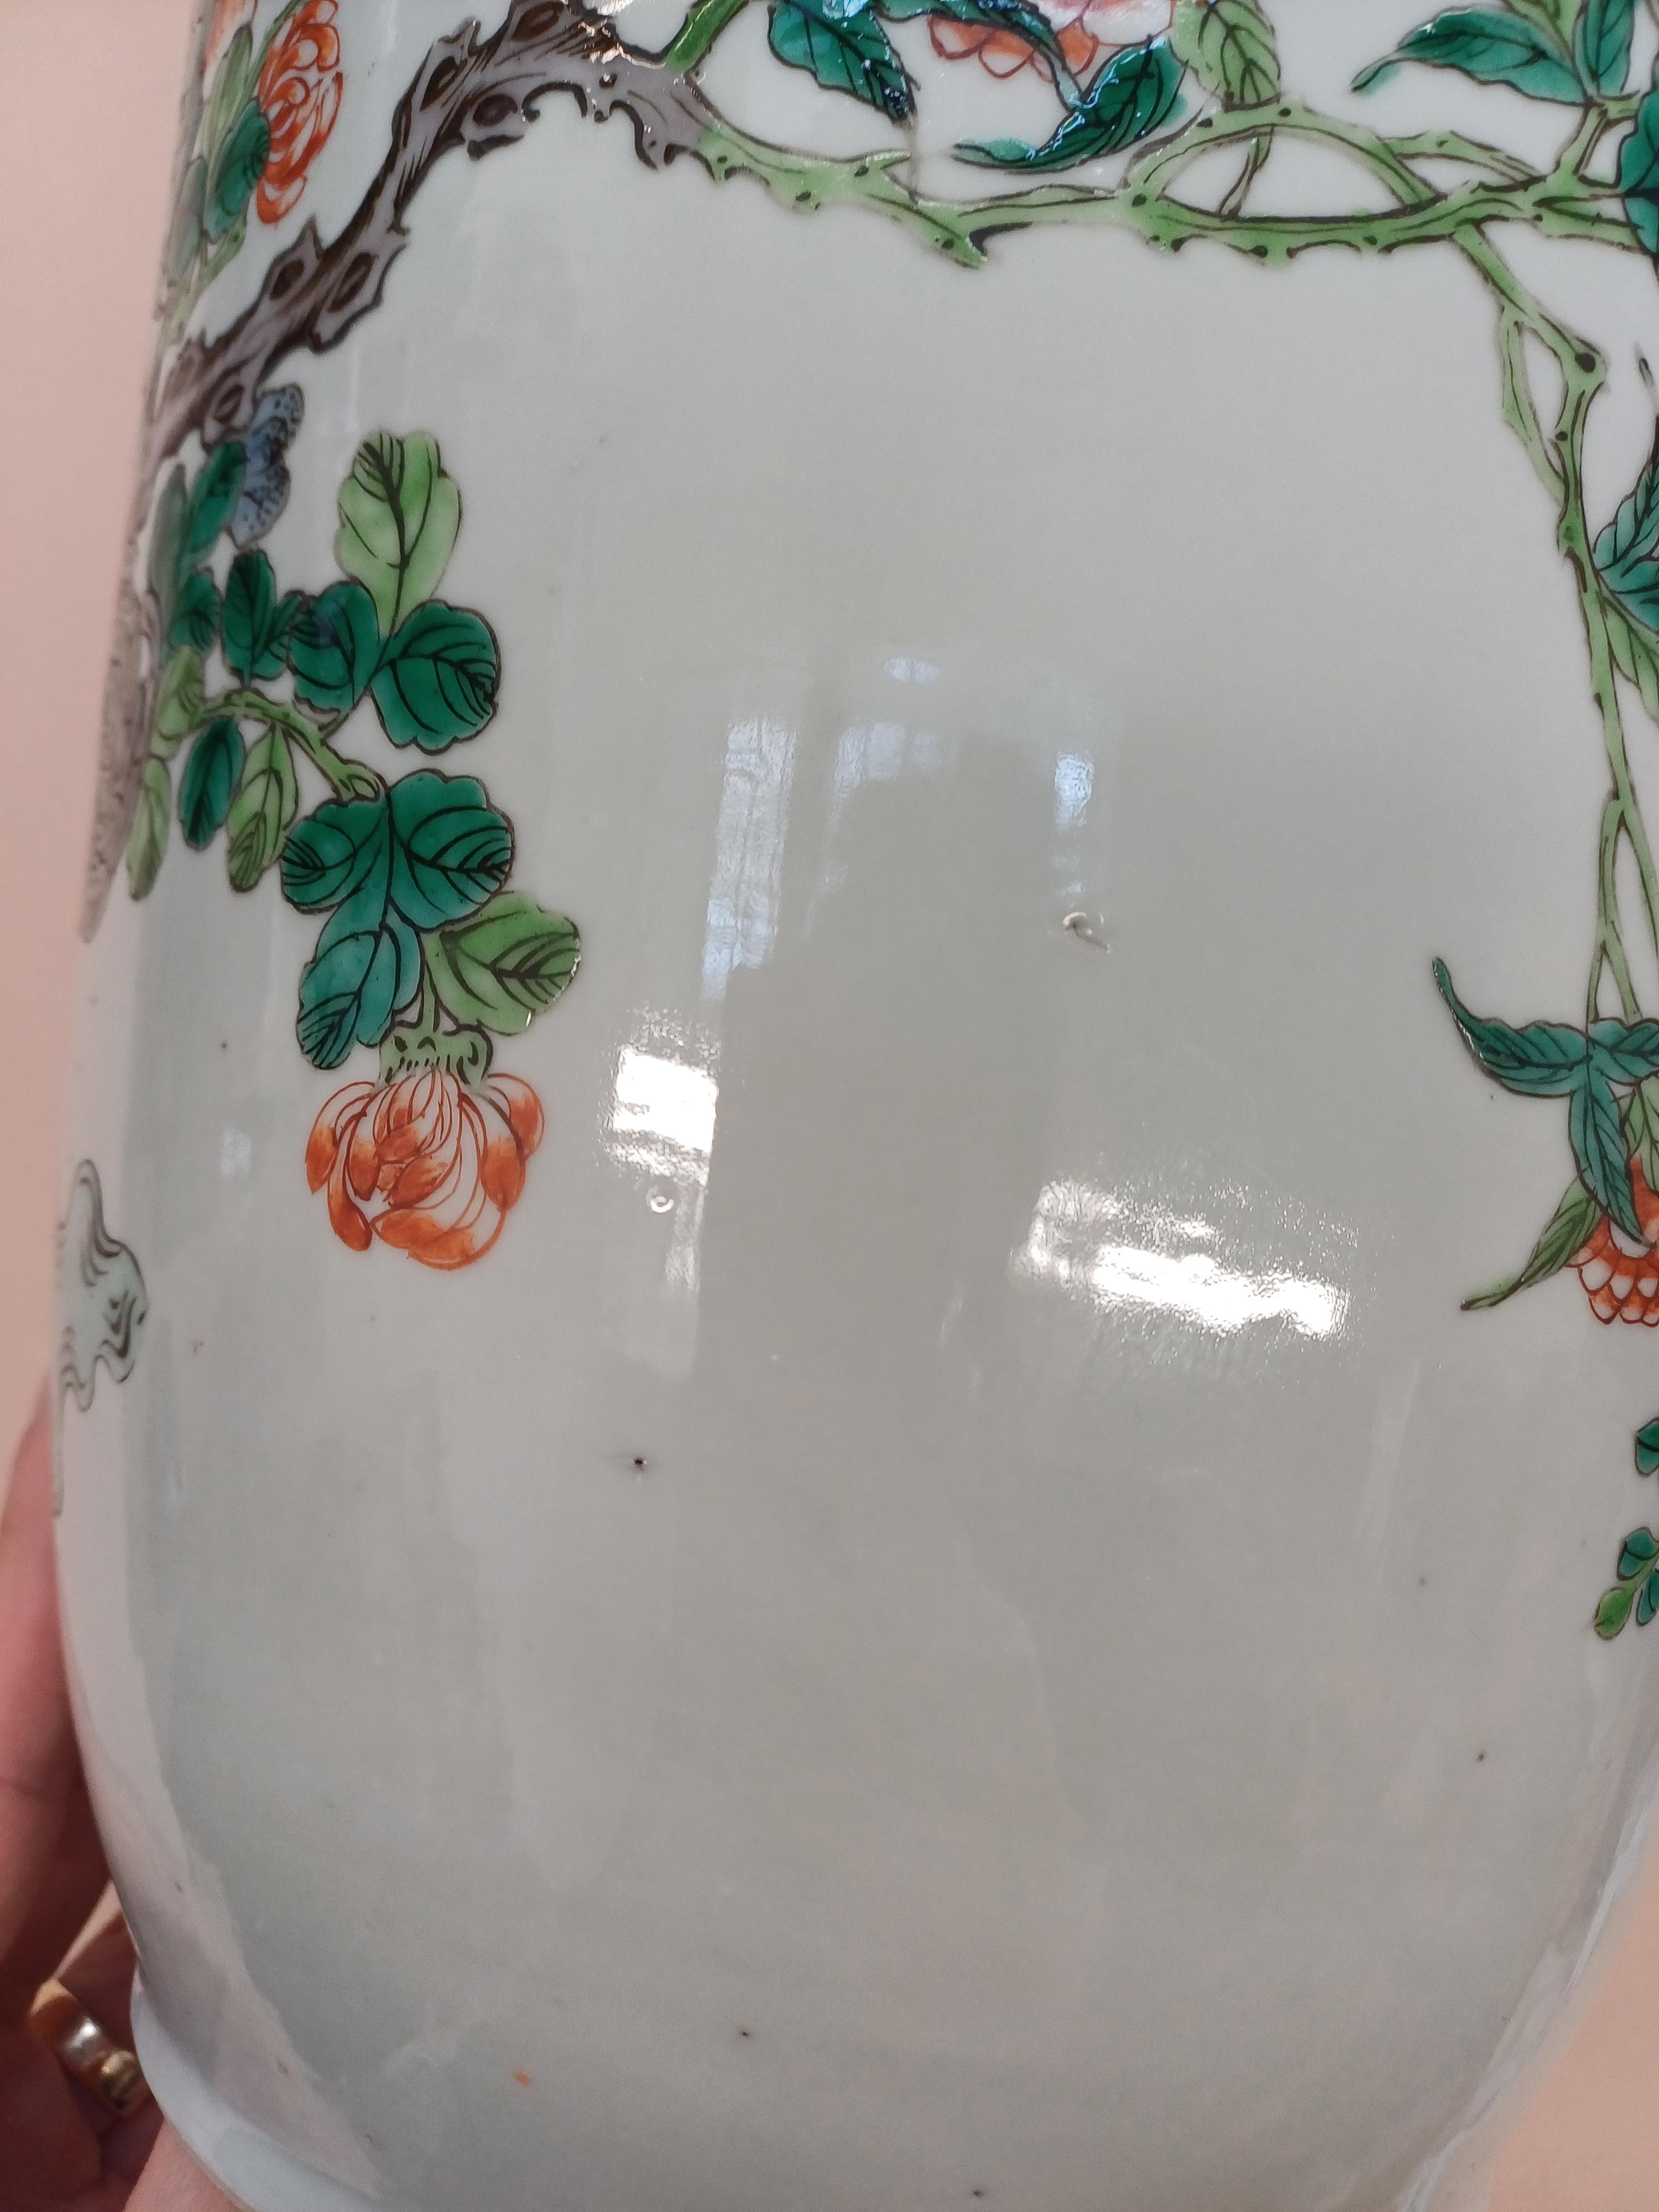 A PAIR OF FINE CHINESE FAMILLE-VERTE ‘BIRD AND BLOSSOM’ VASES 清康熙 五彩花鳥圖紋瓶一對 - Image 15 of 16